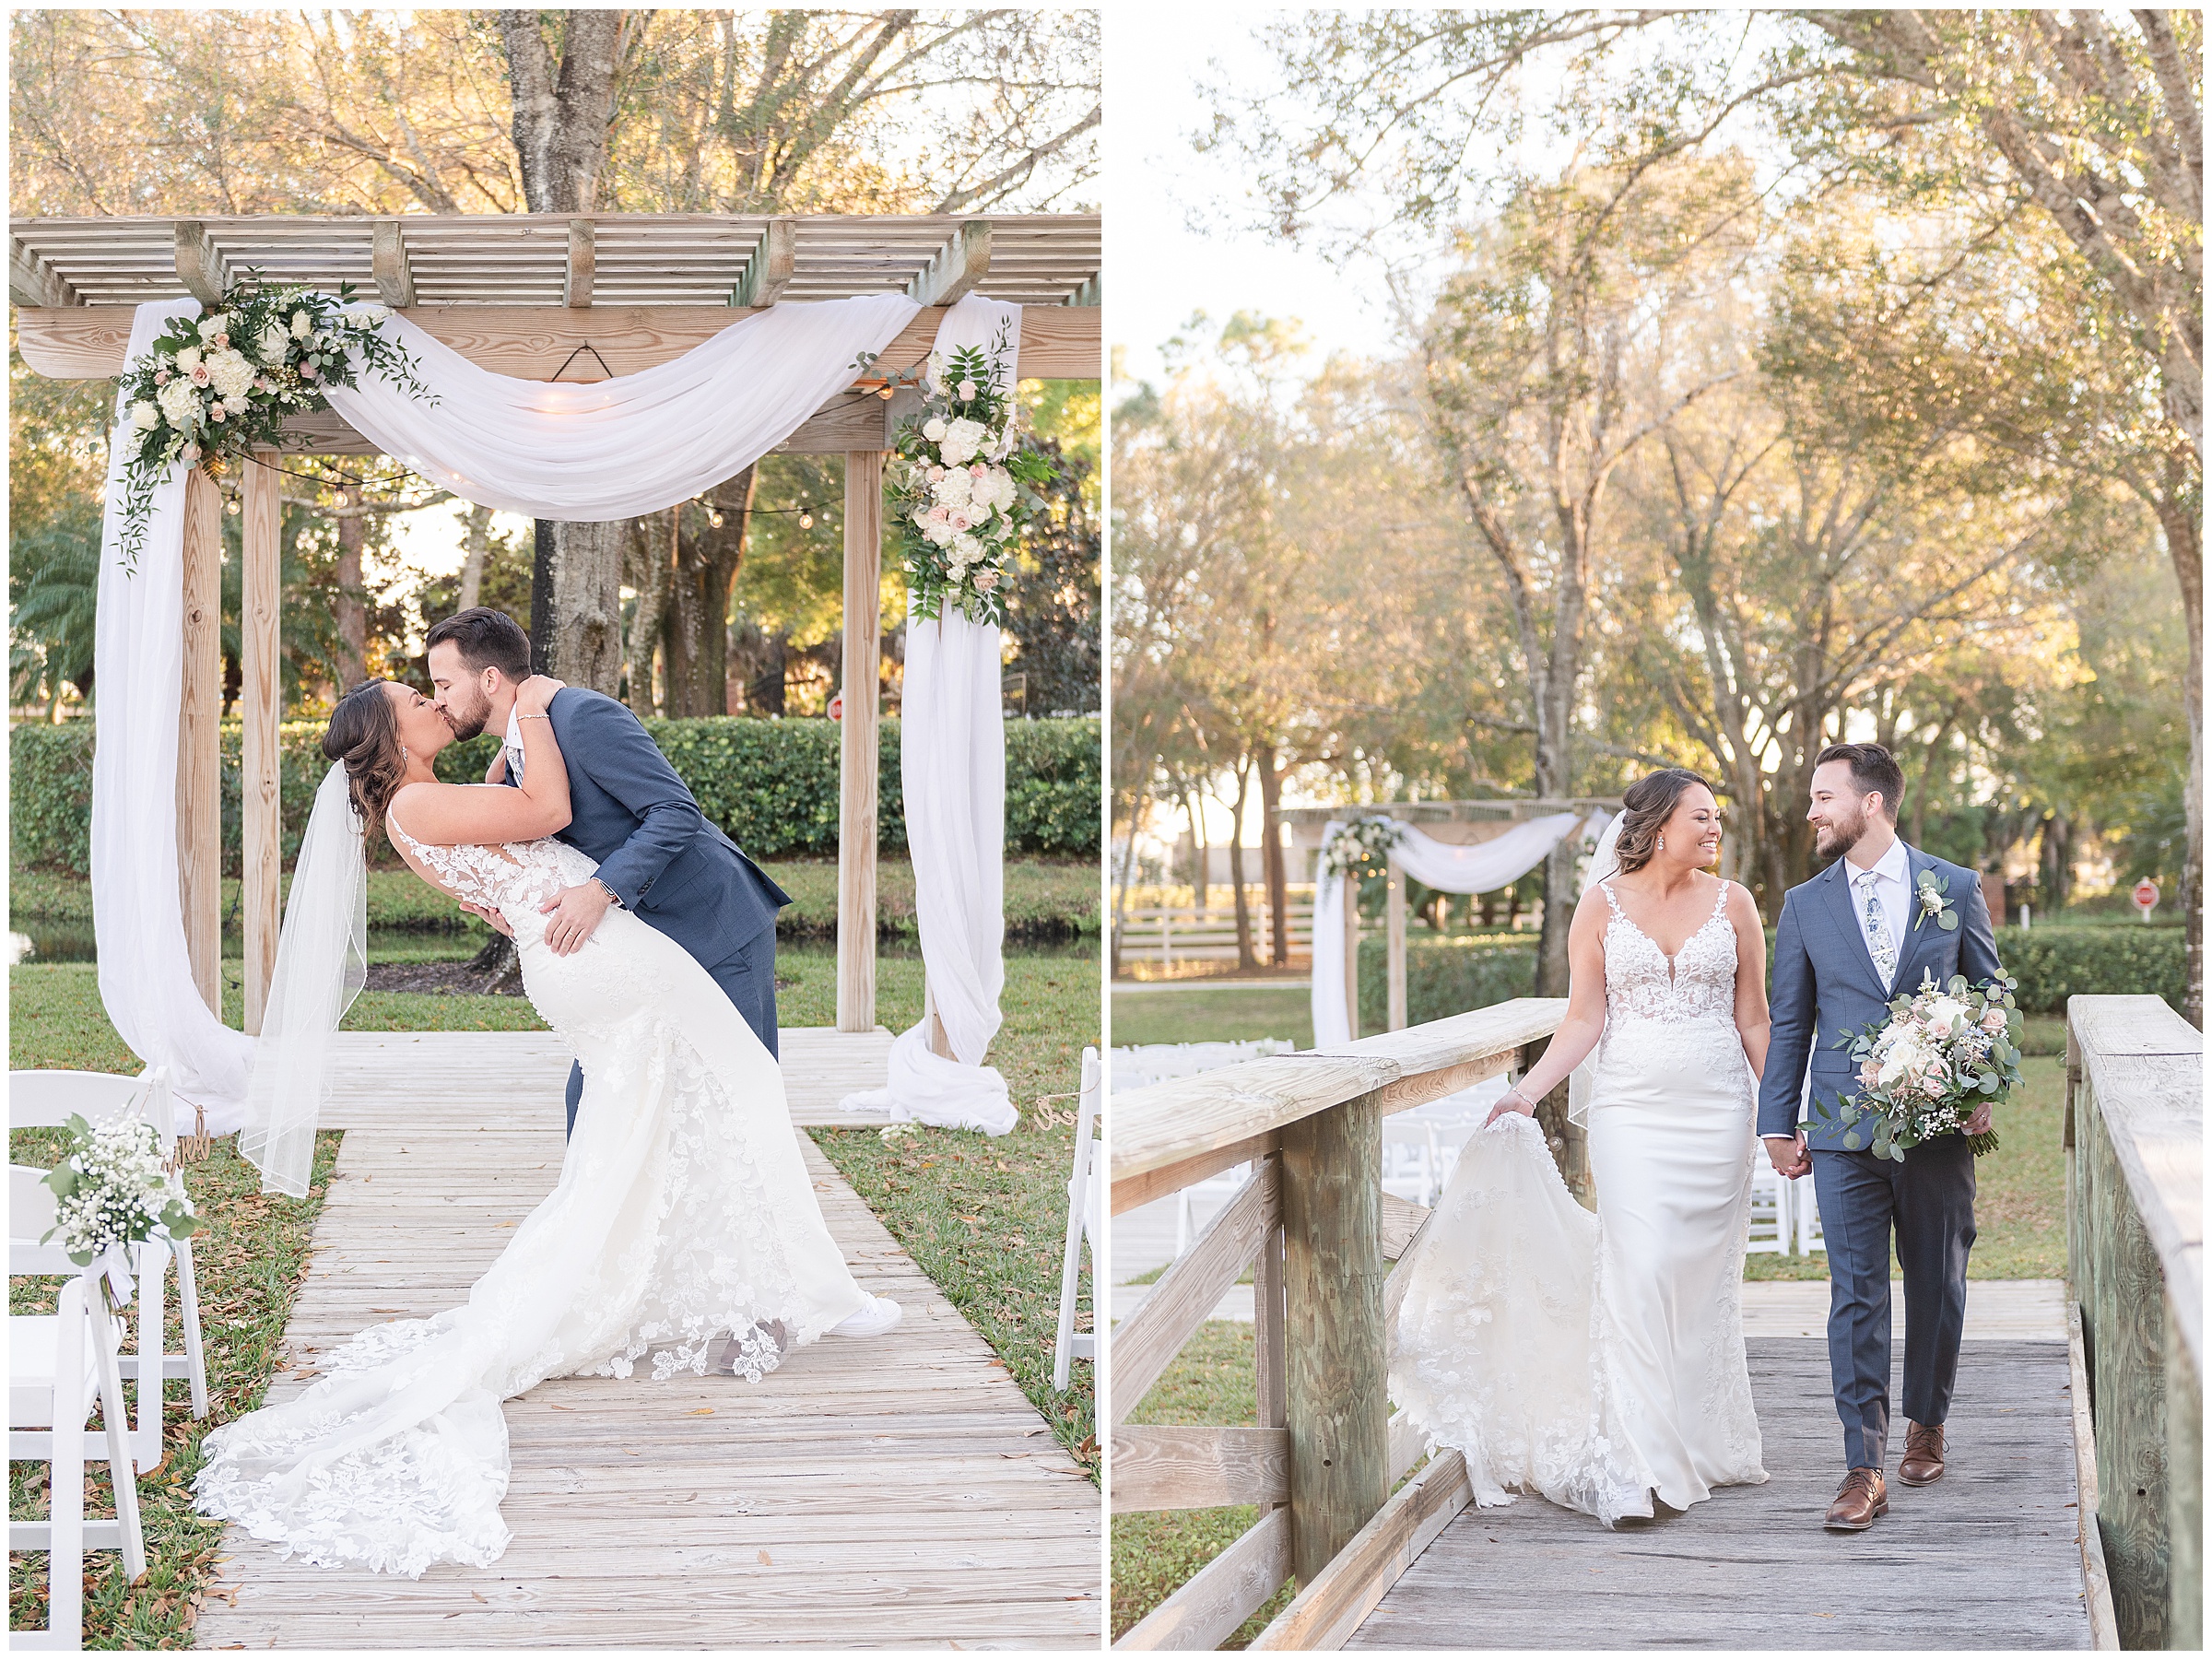 Bride and groom photos walking and dipping and kissing | Magnolia Manor Wedding in Vero Beach